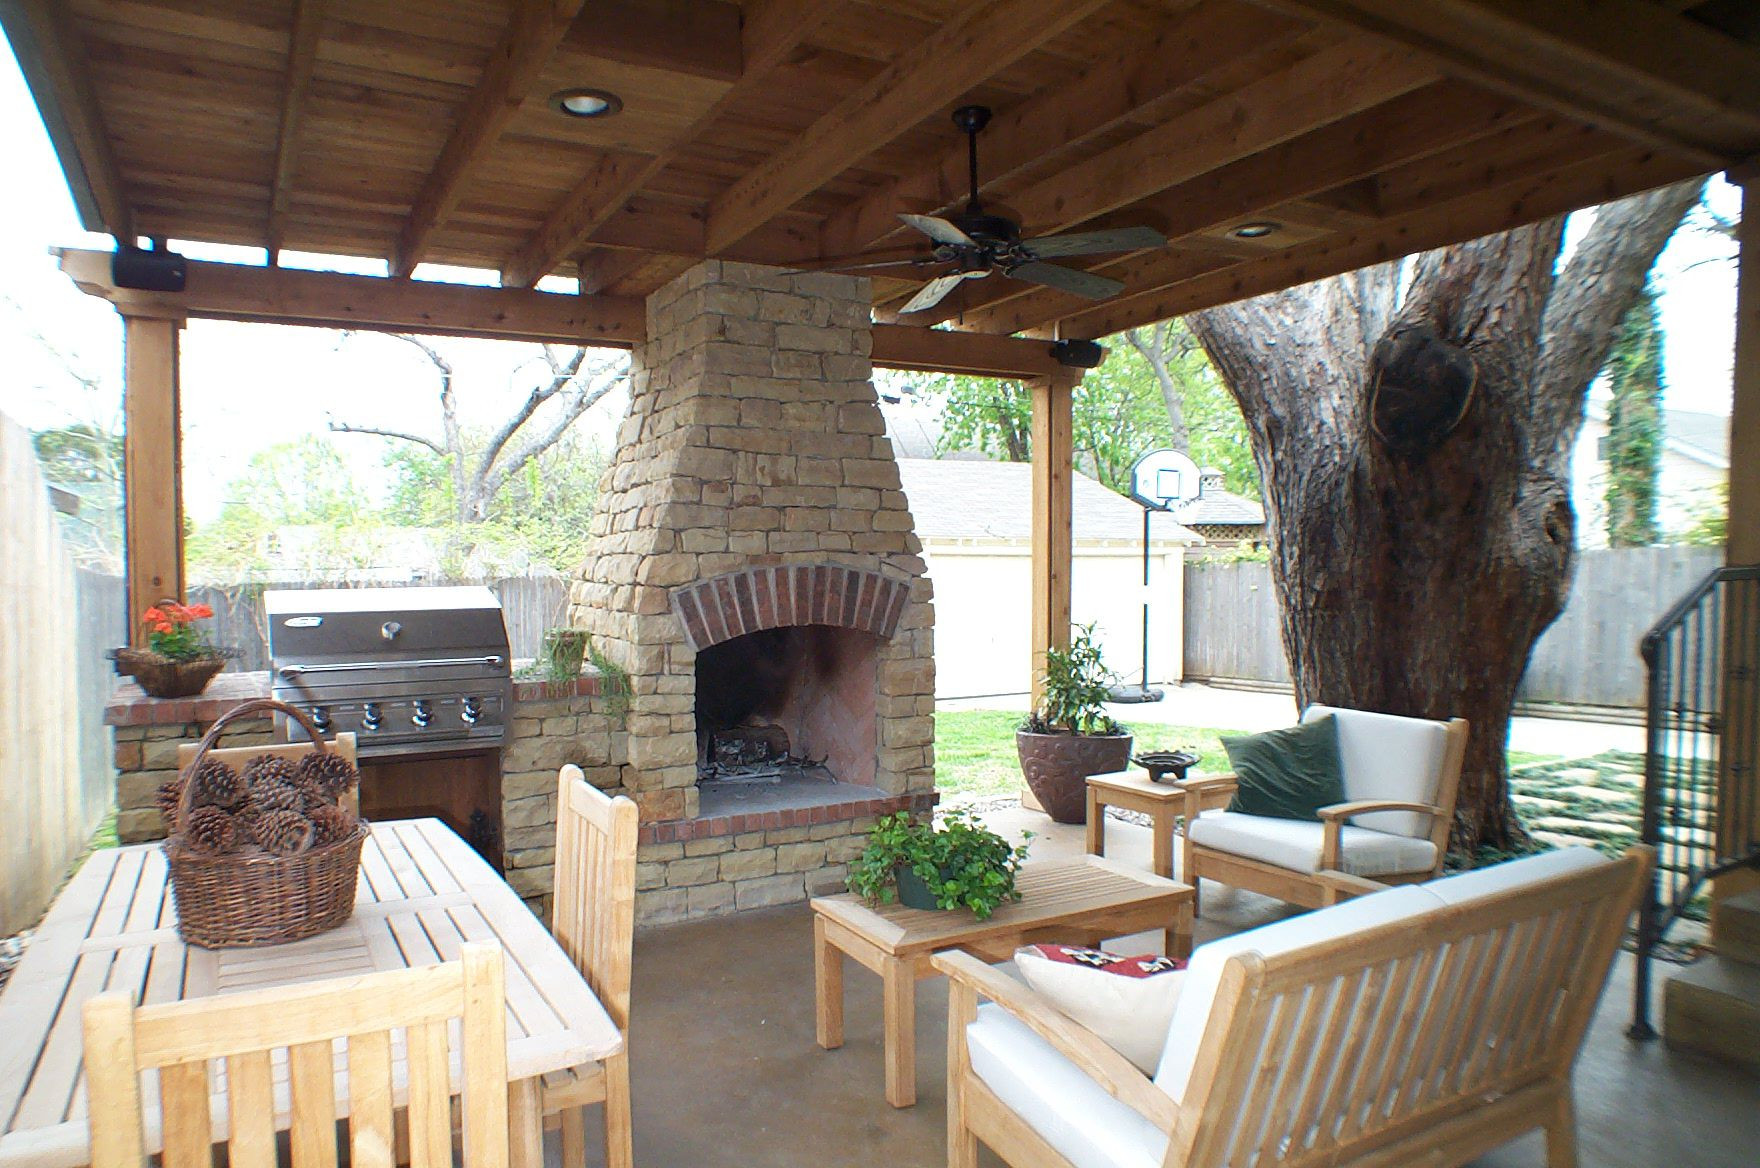 Outdoor Living Space Ideas
 Your Guide to Attractively Cozy Outdoor Living Room